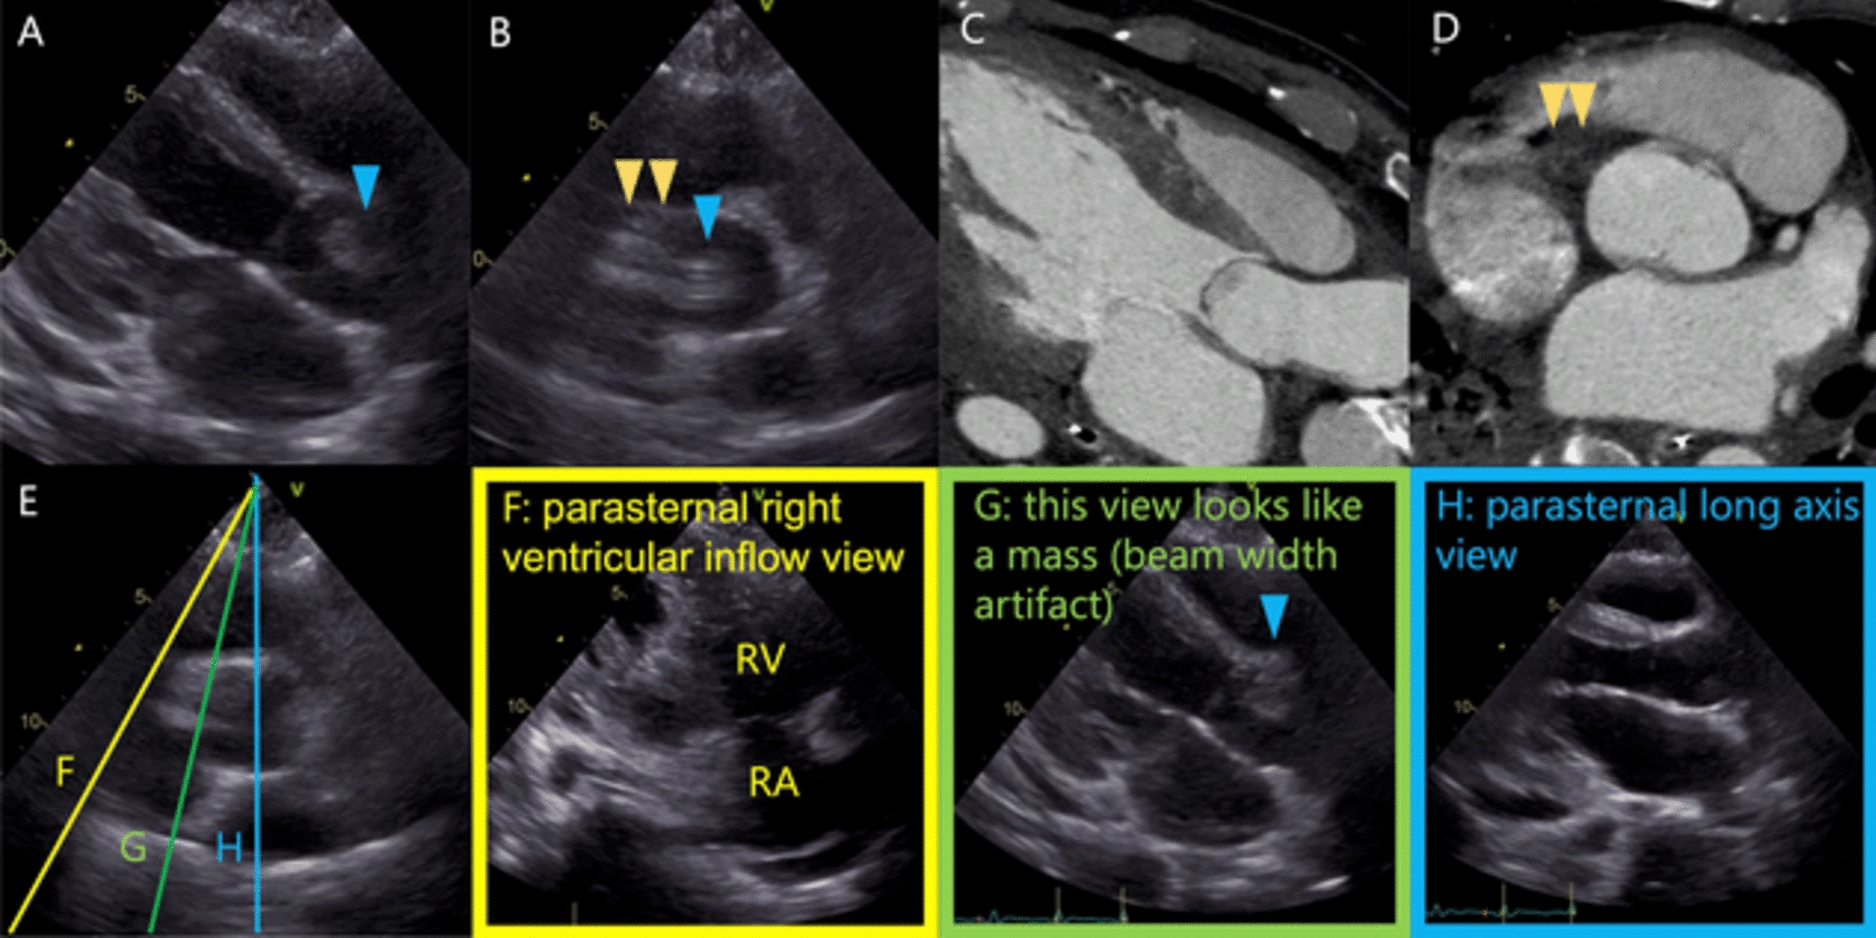 Mass-like lesion in the ascending aorta by side lobe and beam width artifacts